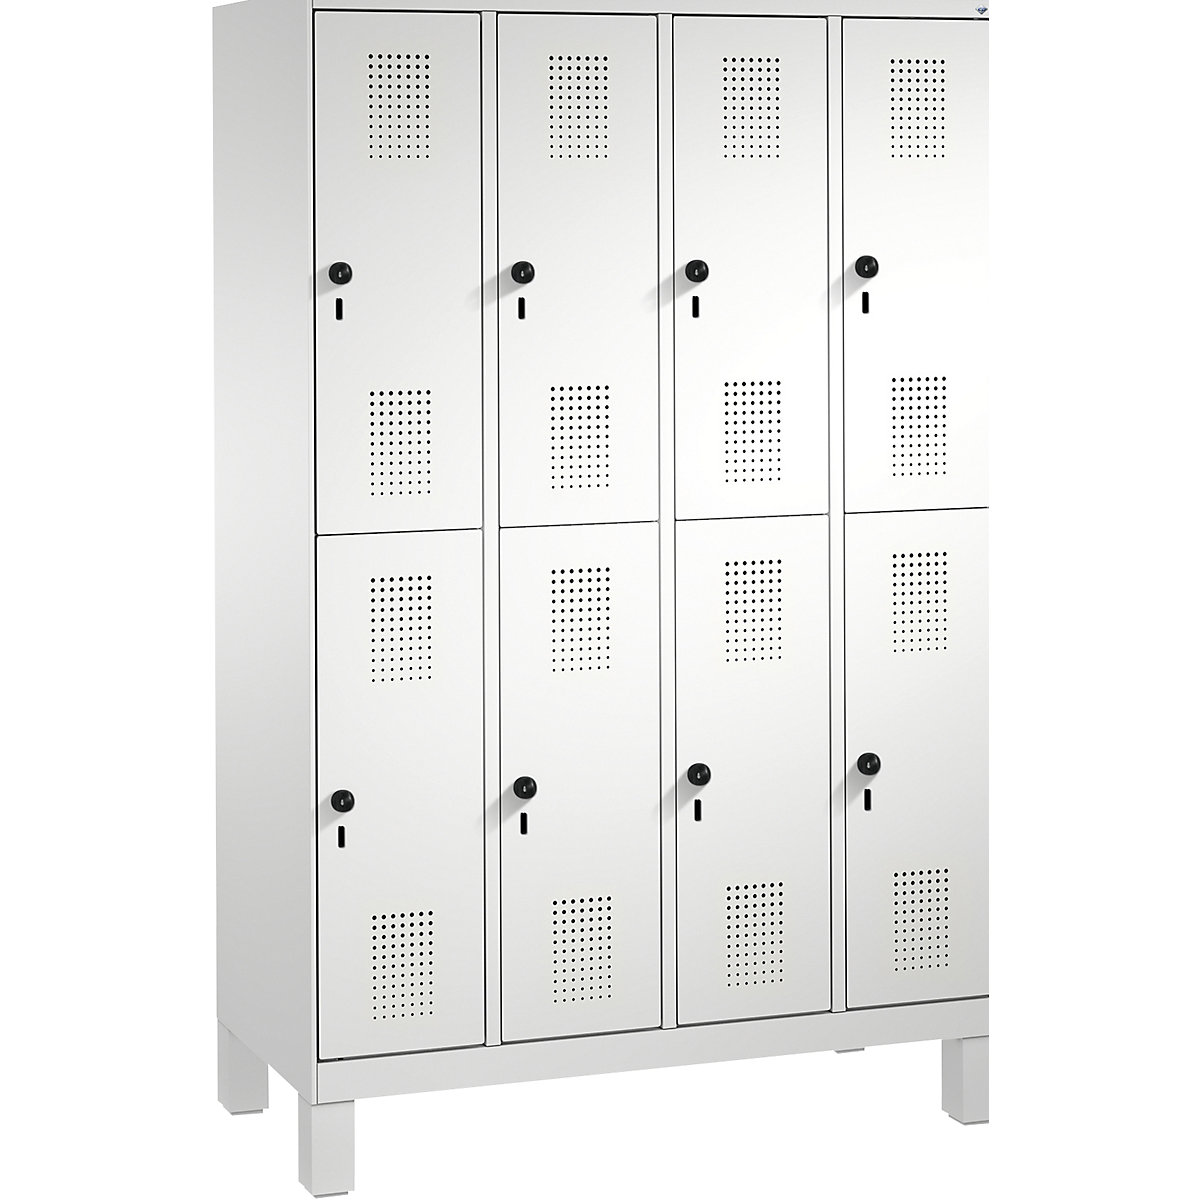 EVOLO cloakroom locker, double tier, with feet – C+P, 4 compartments, 2 shelf compartments each, compartment width 300 mm, light grey-11